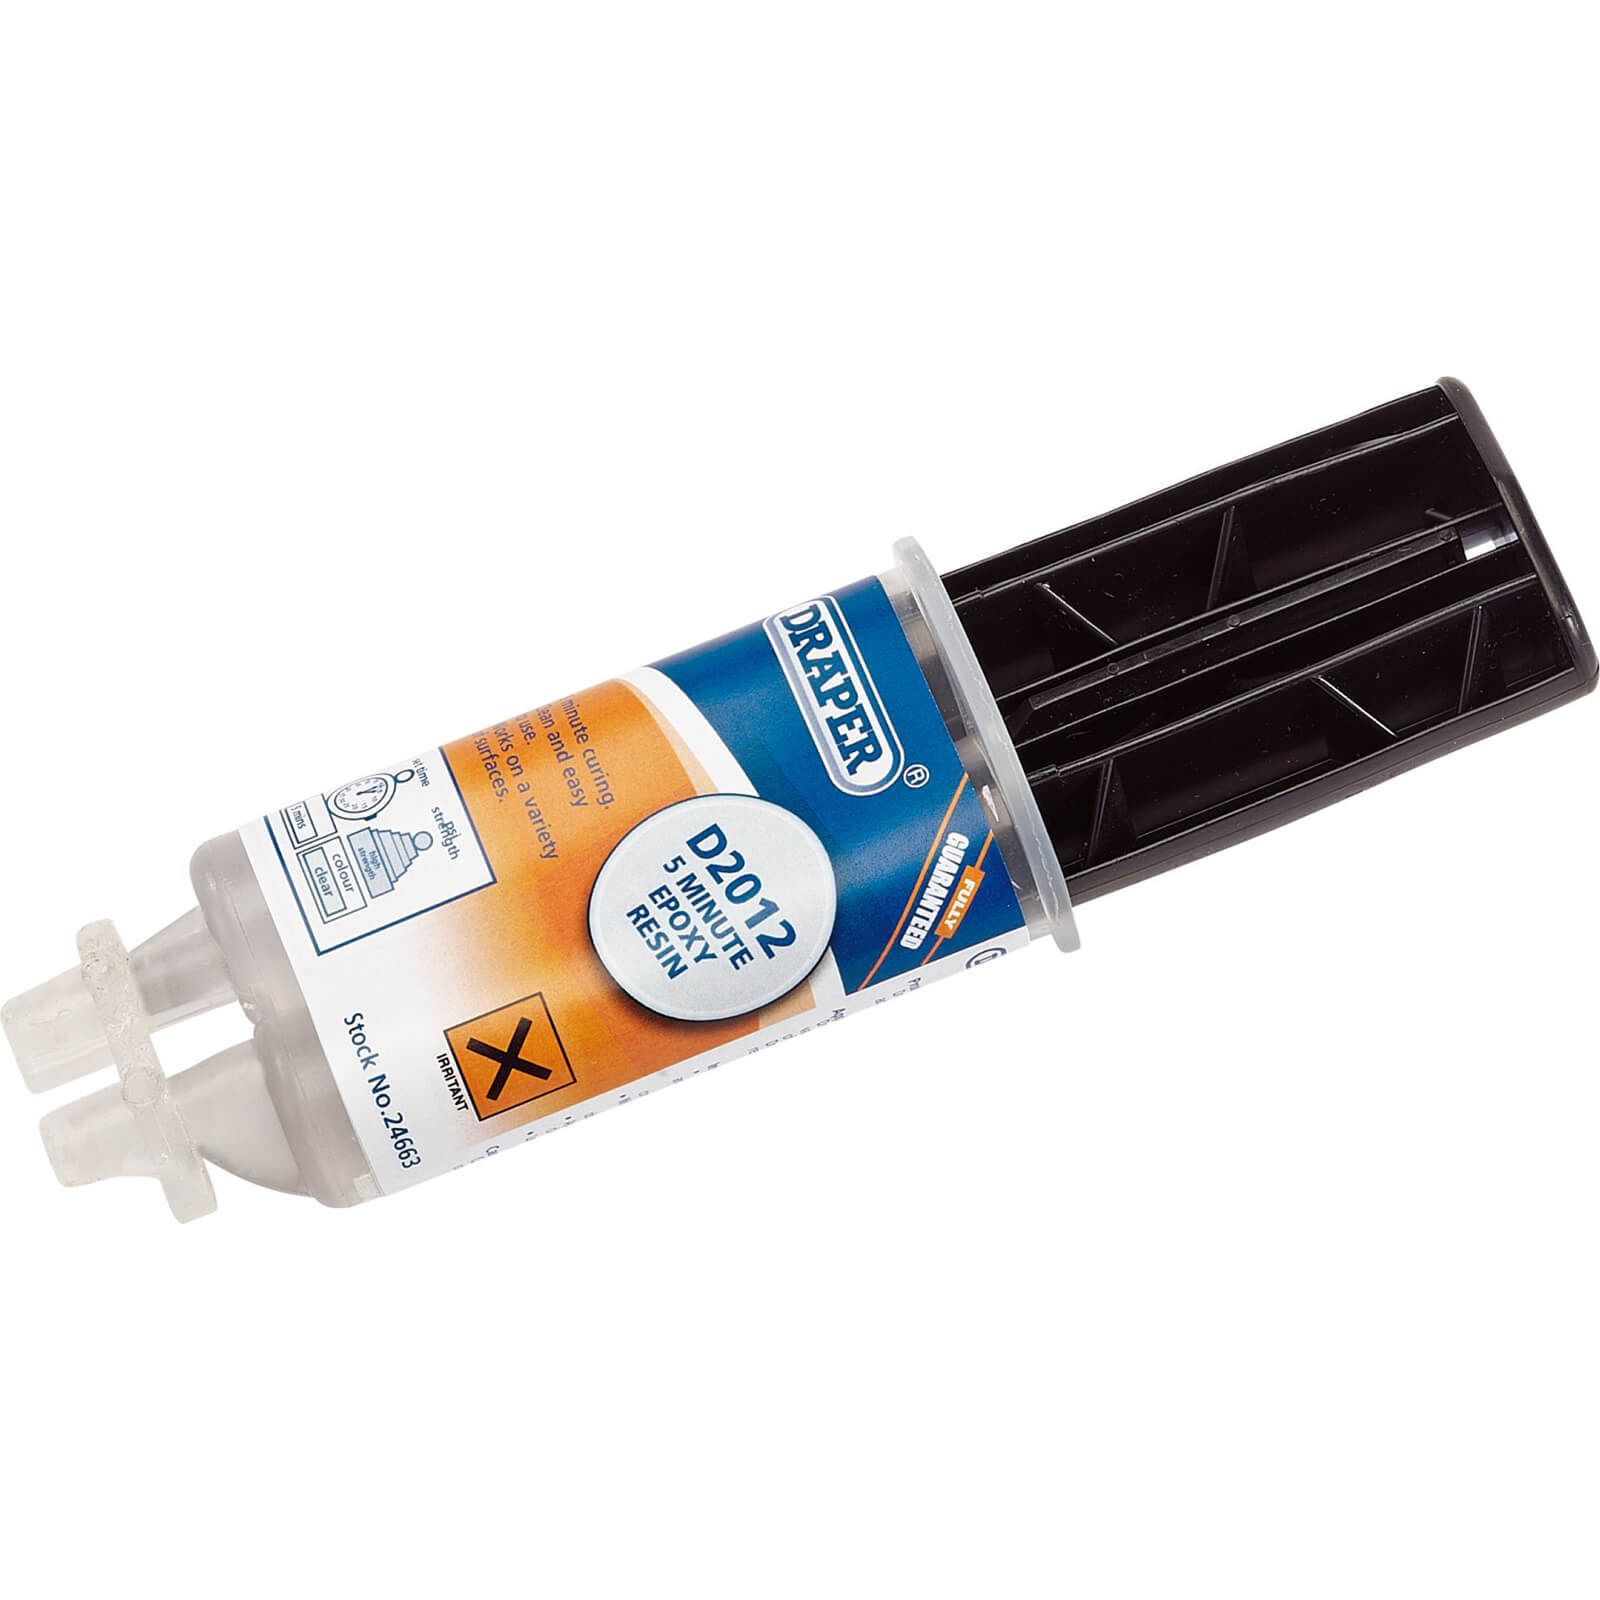 Image of Draper D2012 Epoxy Structural Adhesive